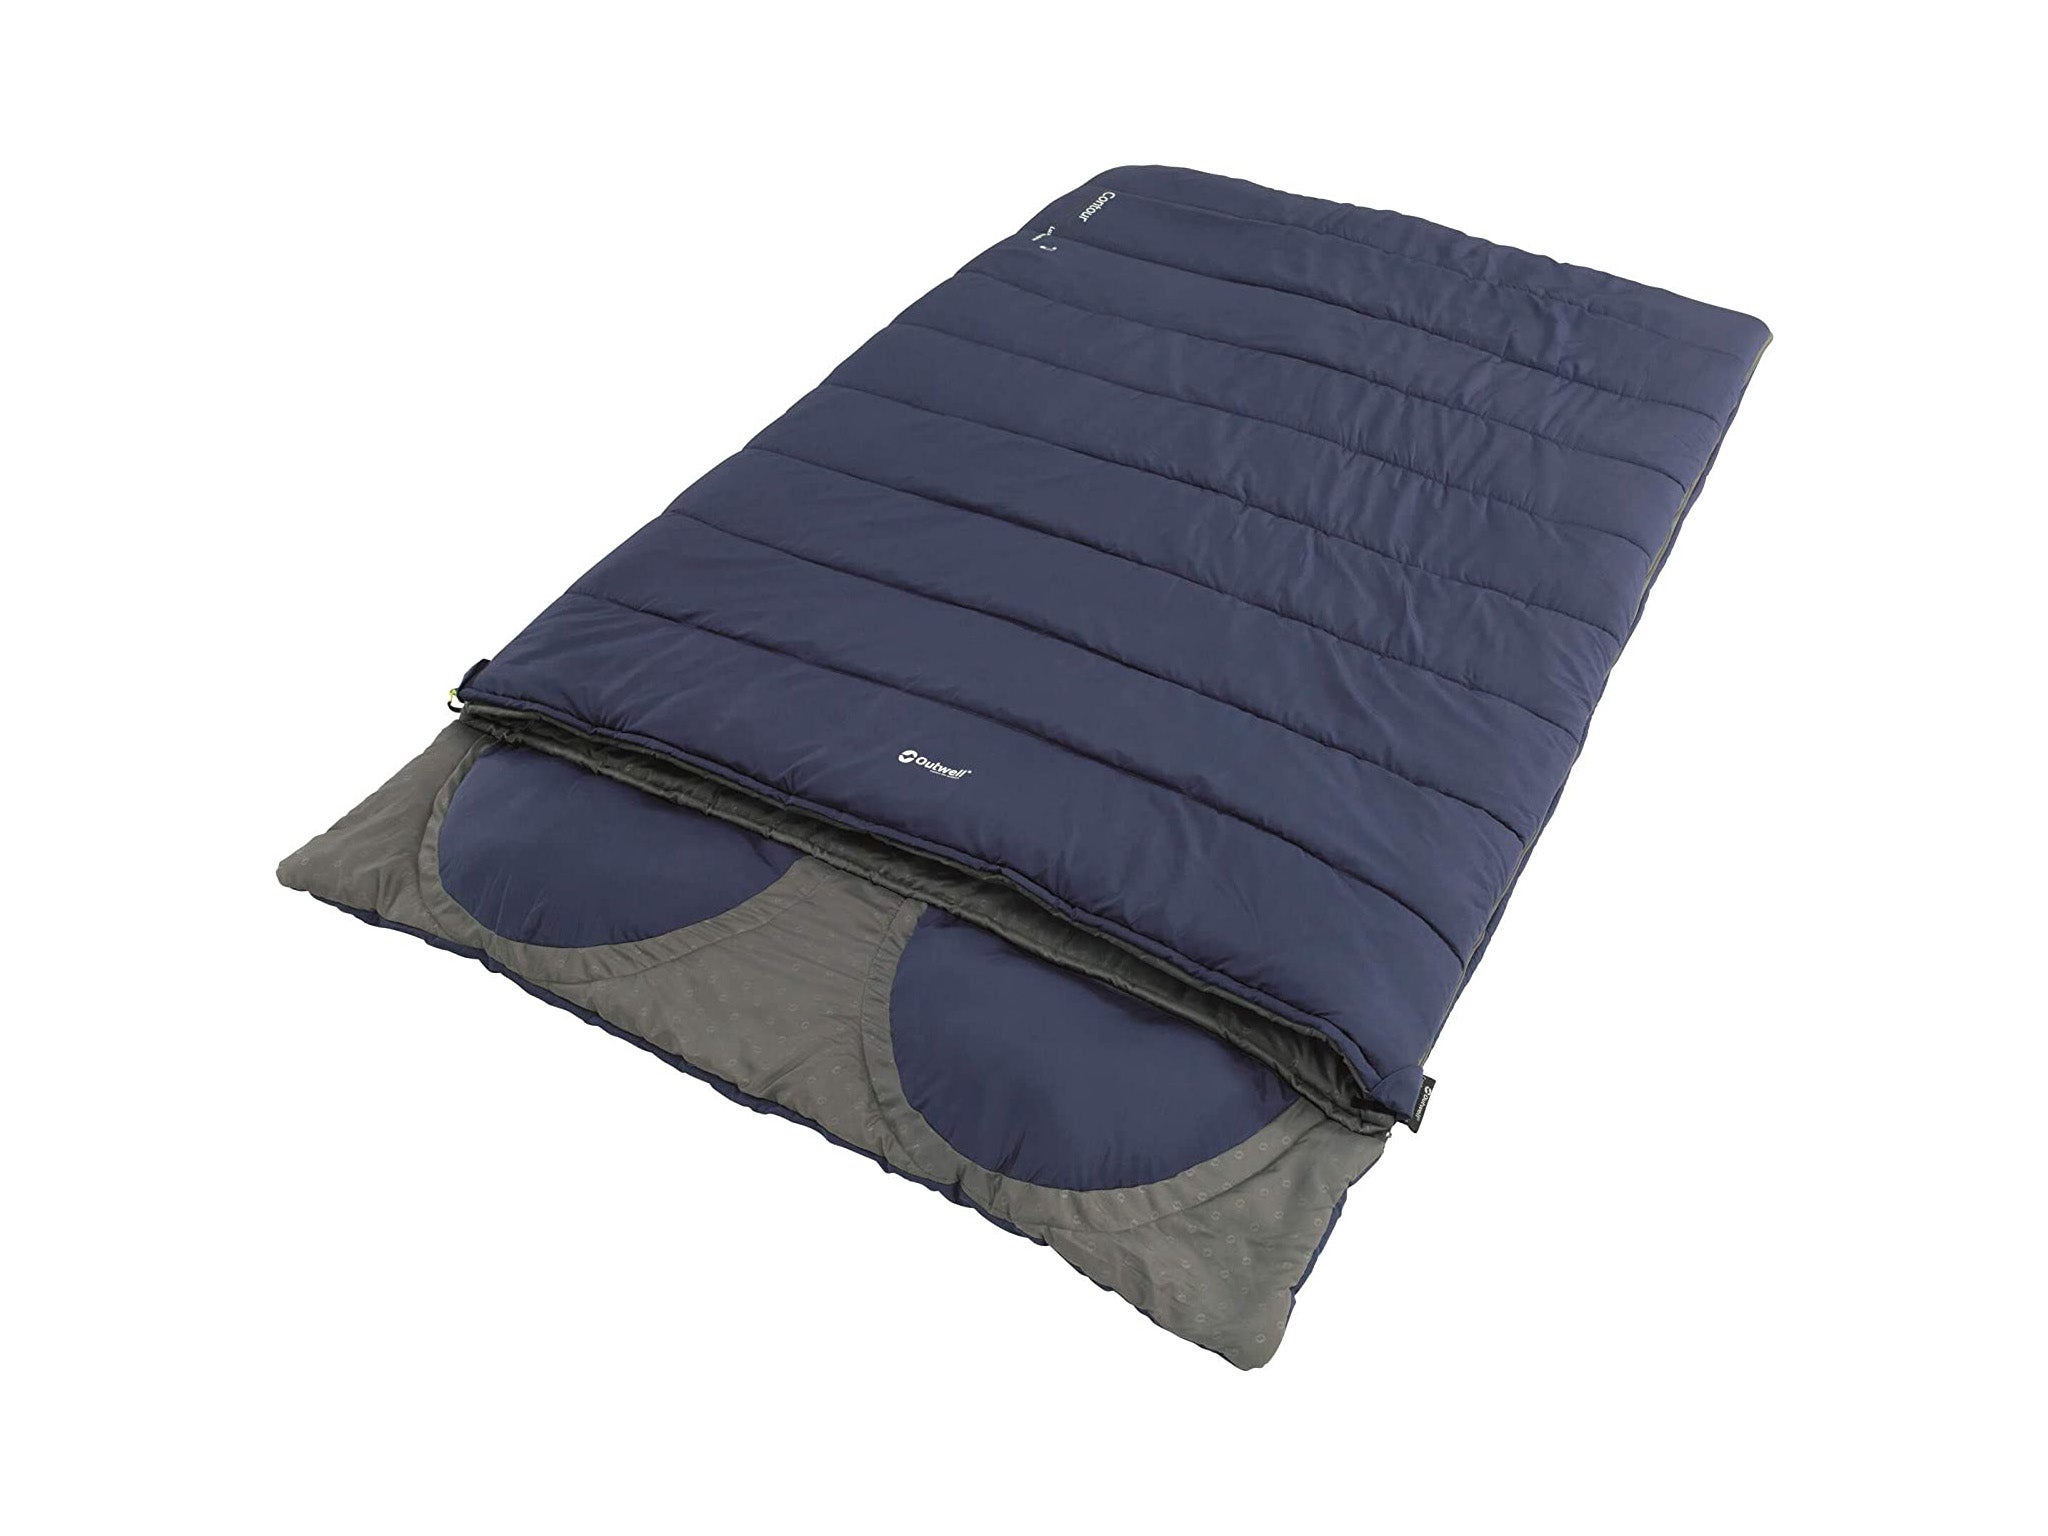 Outwell contour lux double sleeping bag